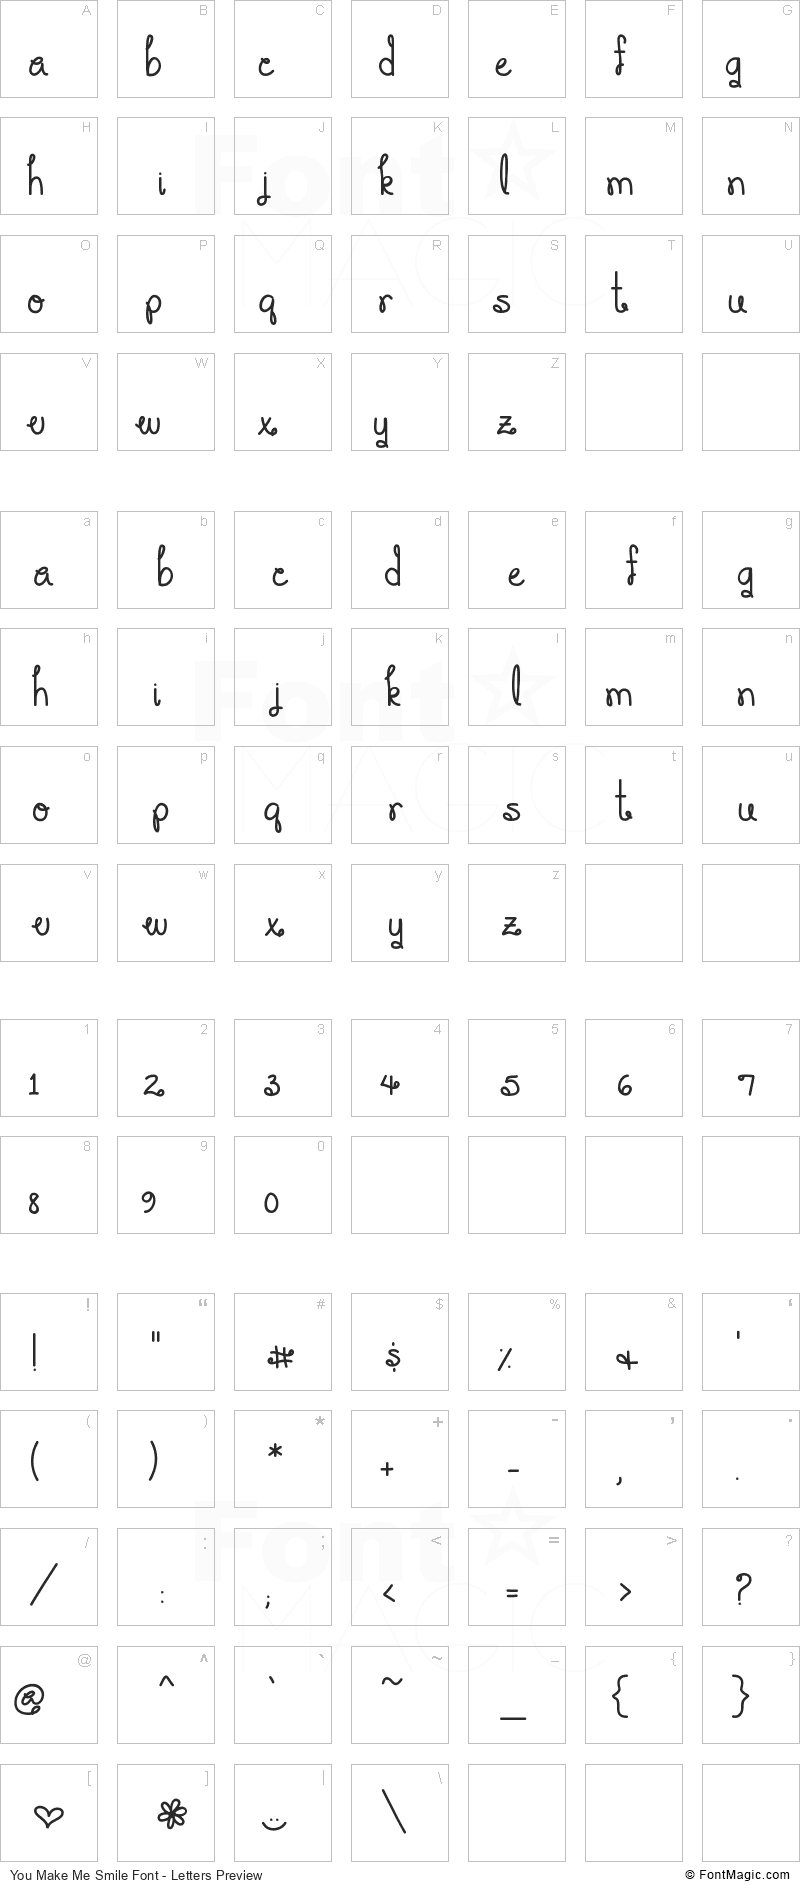 You Make Me Smile Font - All Latters Preview Chart